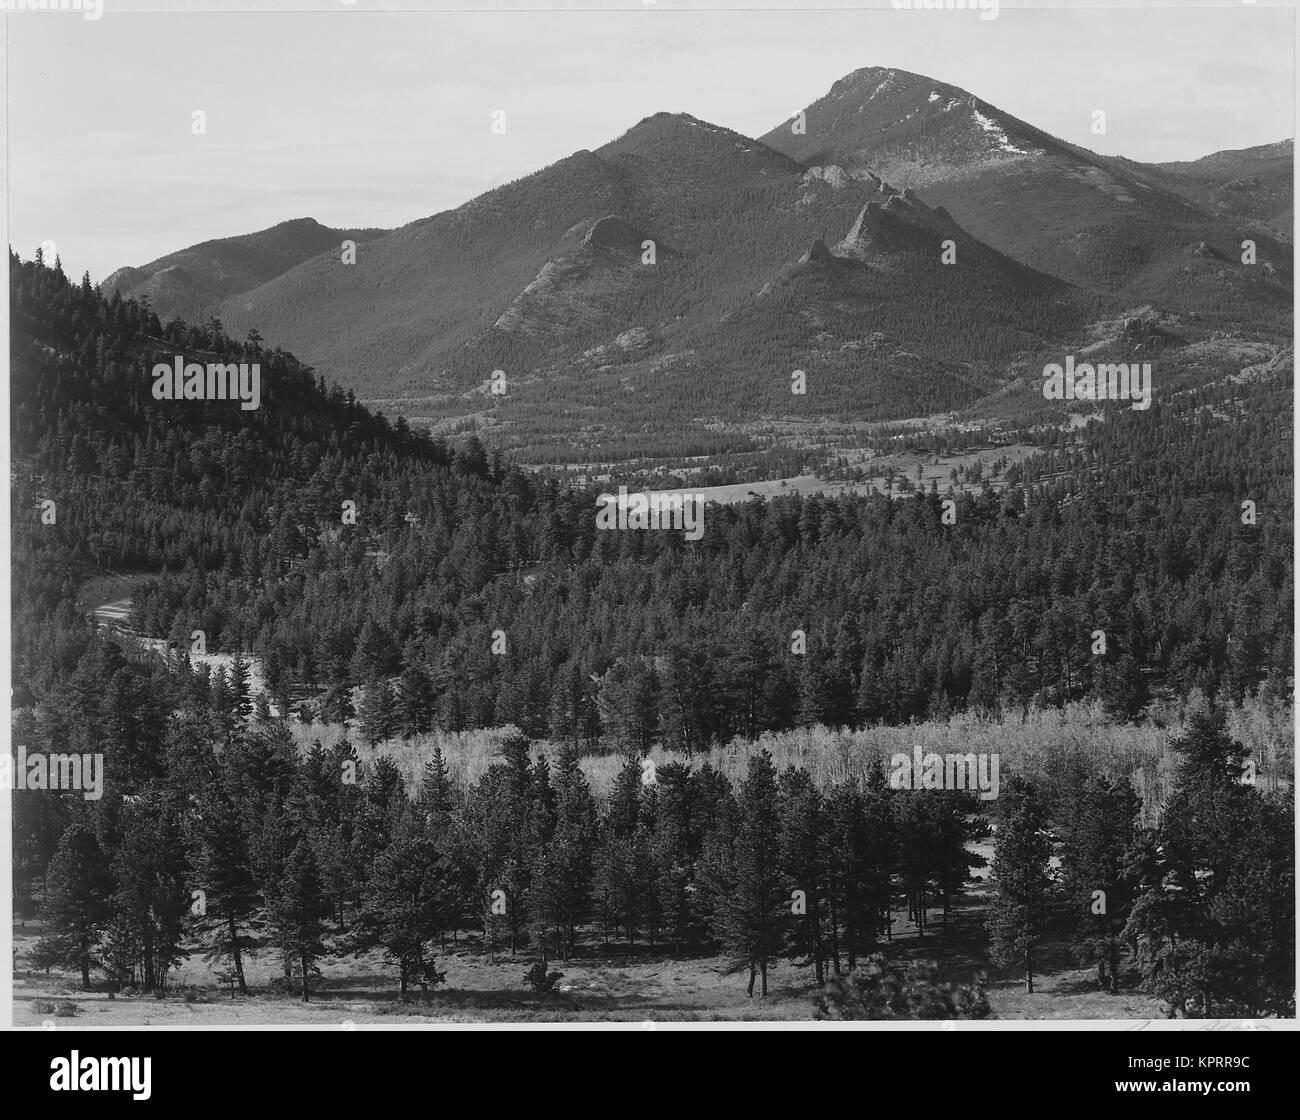 View with trees in foreground barren mountains in background 'In Rocky Mountain National Park' Colorado 1933 - 1942 Stock Photo